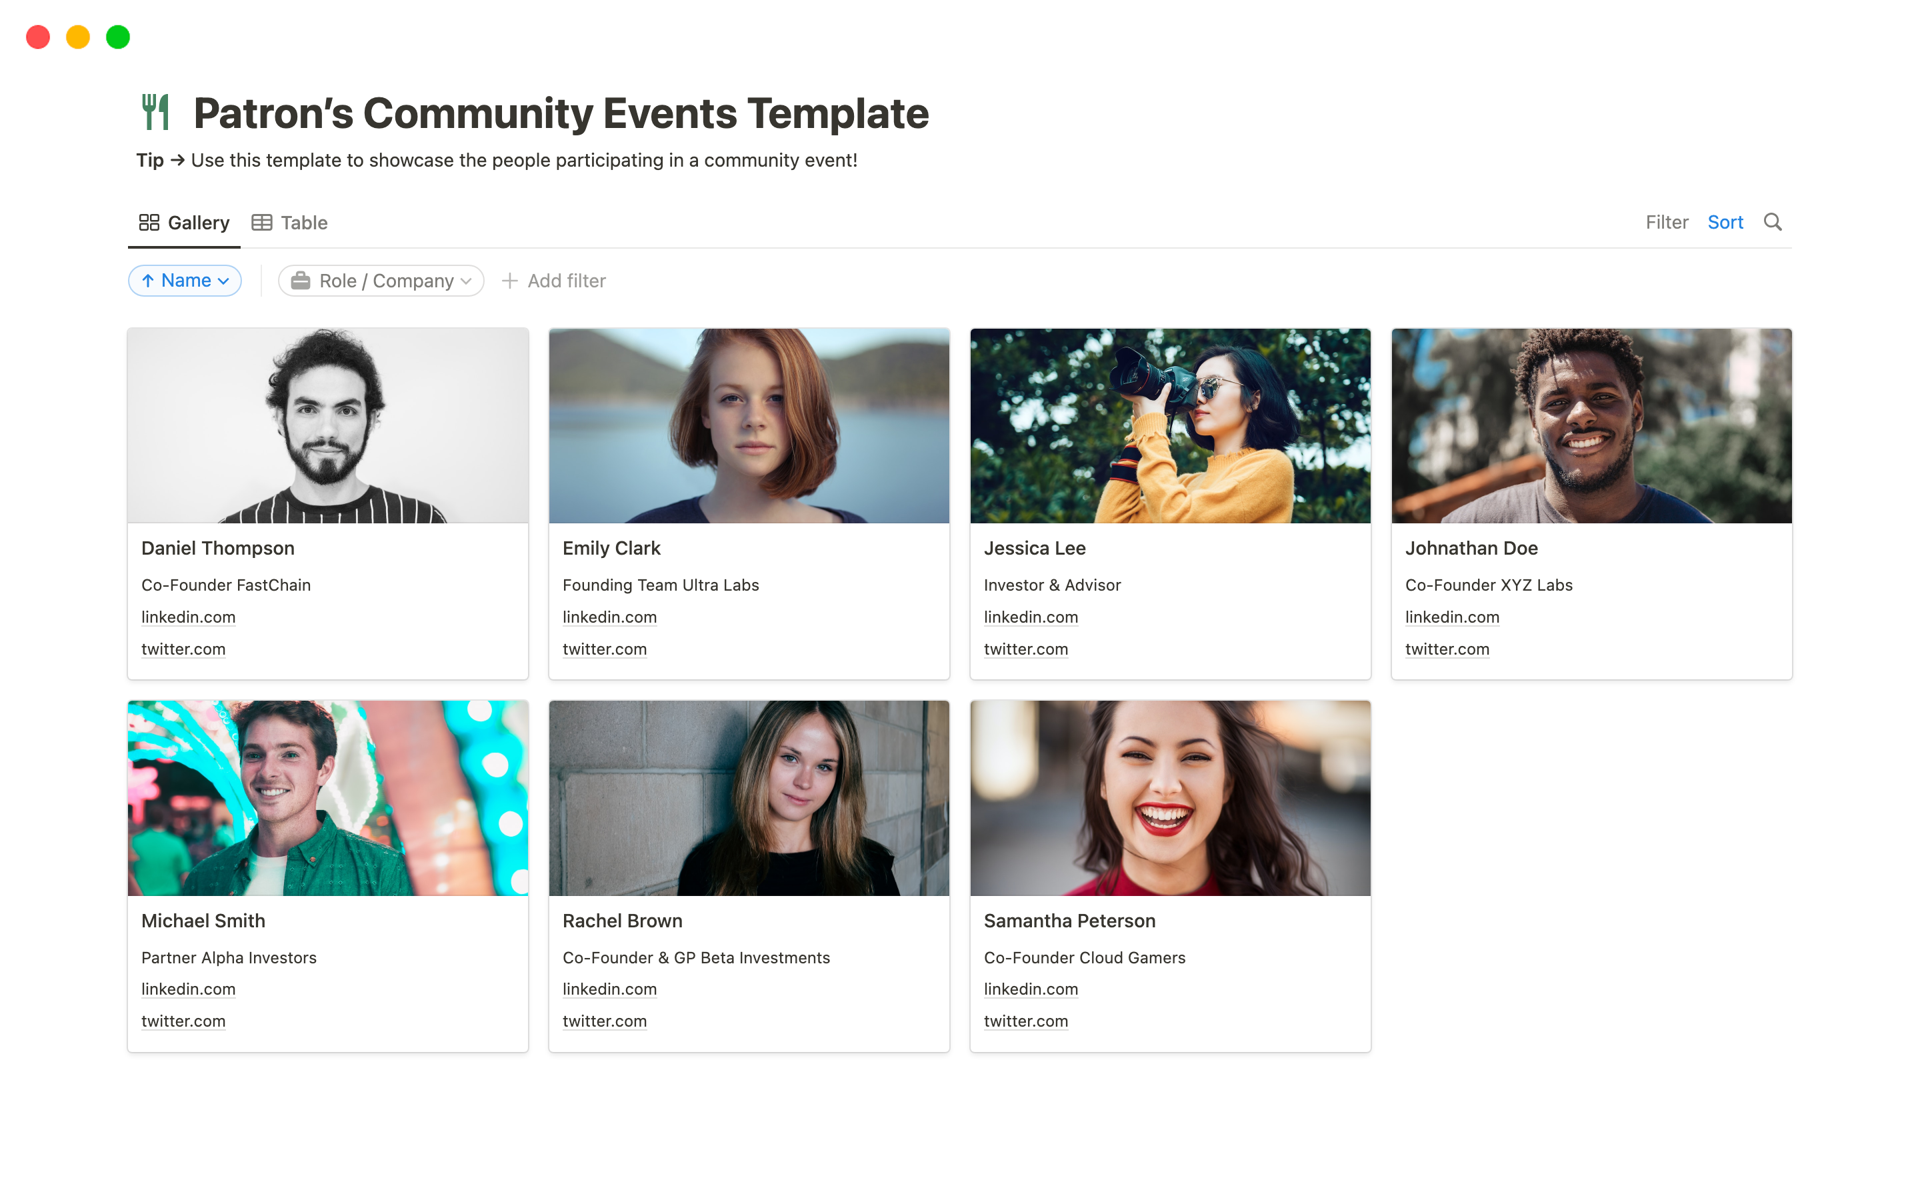 Use this template to showcase the people participating in a community event!